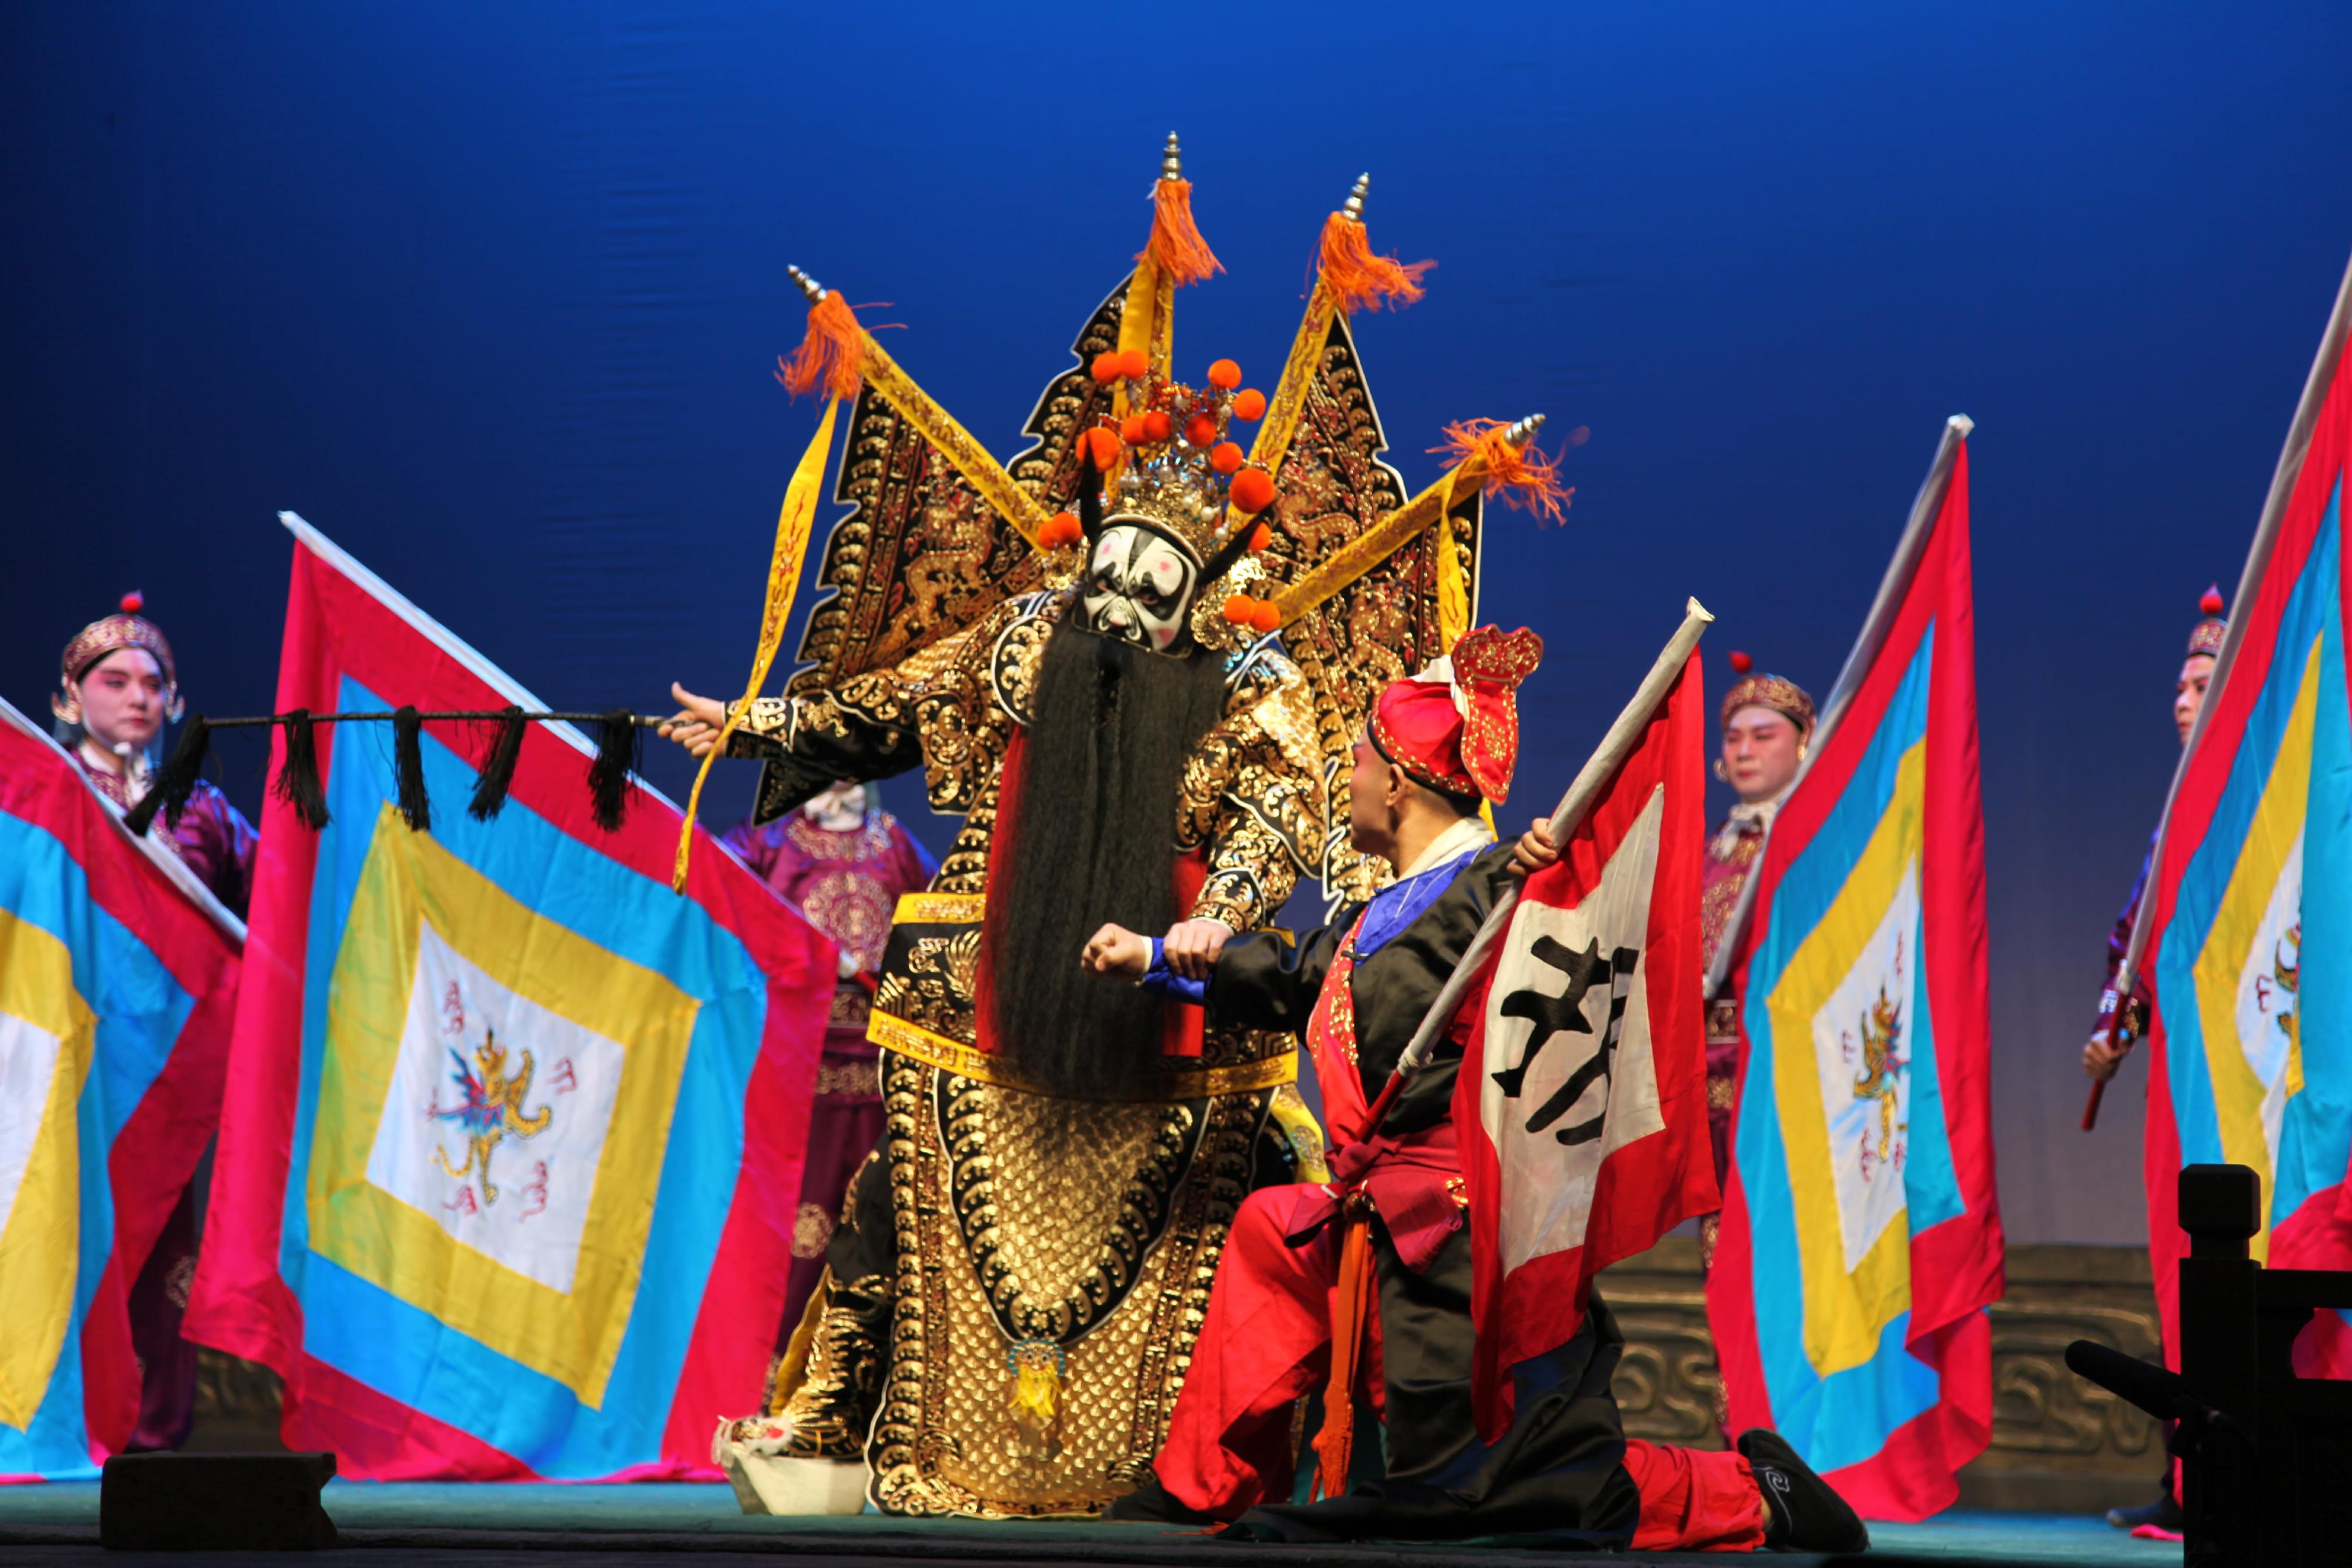 The inaugural Chinese Culture Festival will stage two classic Shandong Liuzi opera plays in July. Photo shows a scene from the performance "Zhang Fei Crashing the Palace Gate".